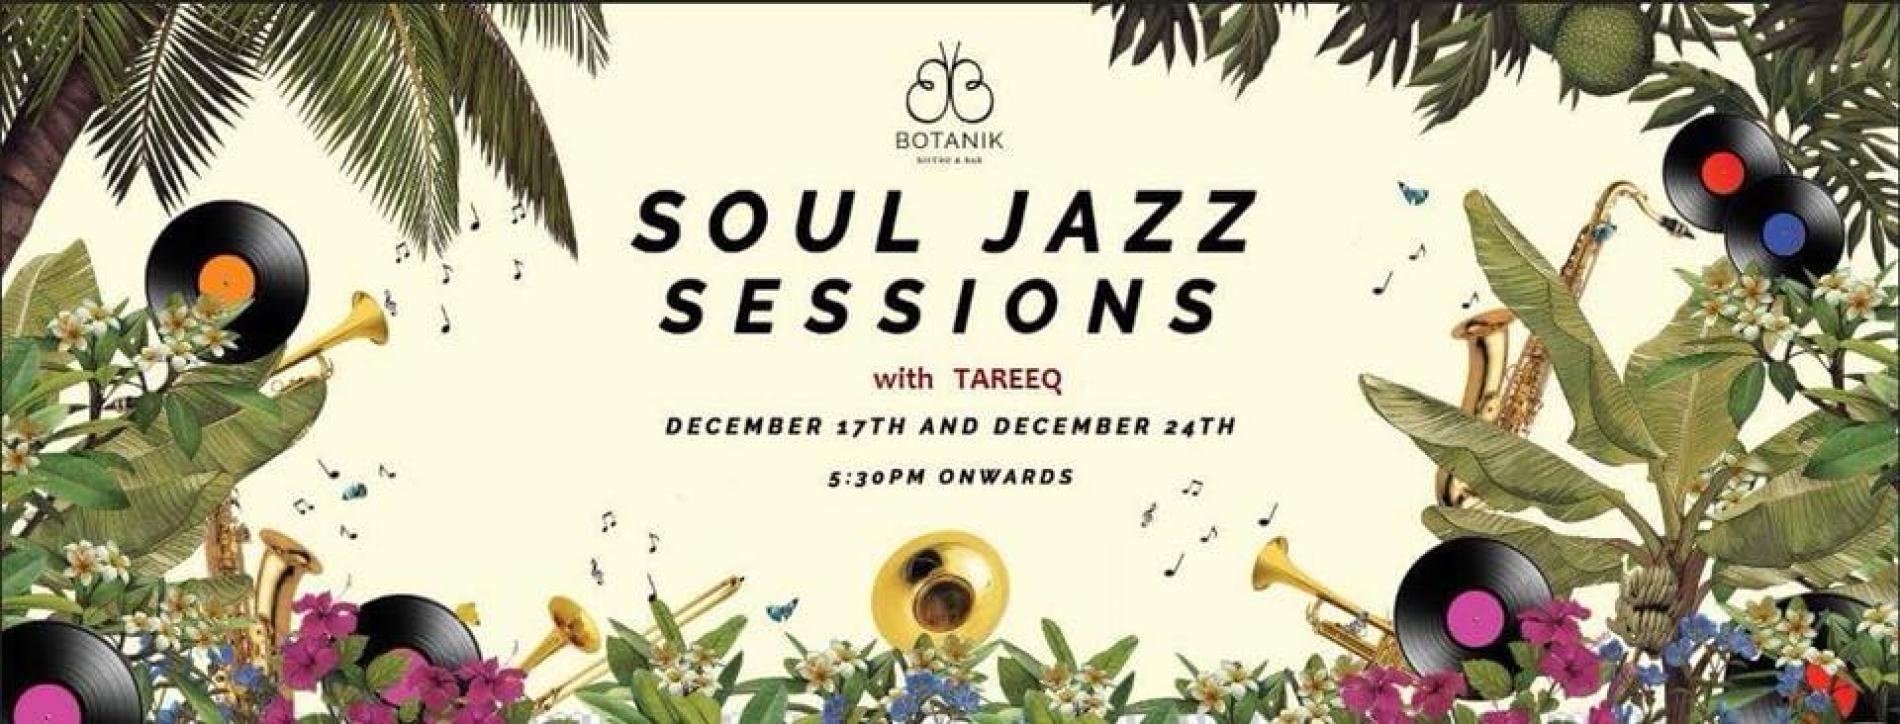 Soul Jazz Sessions